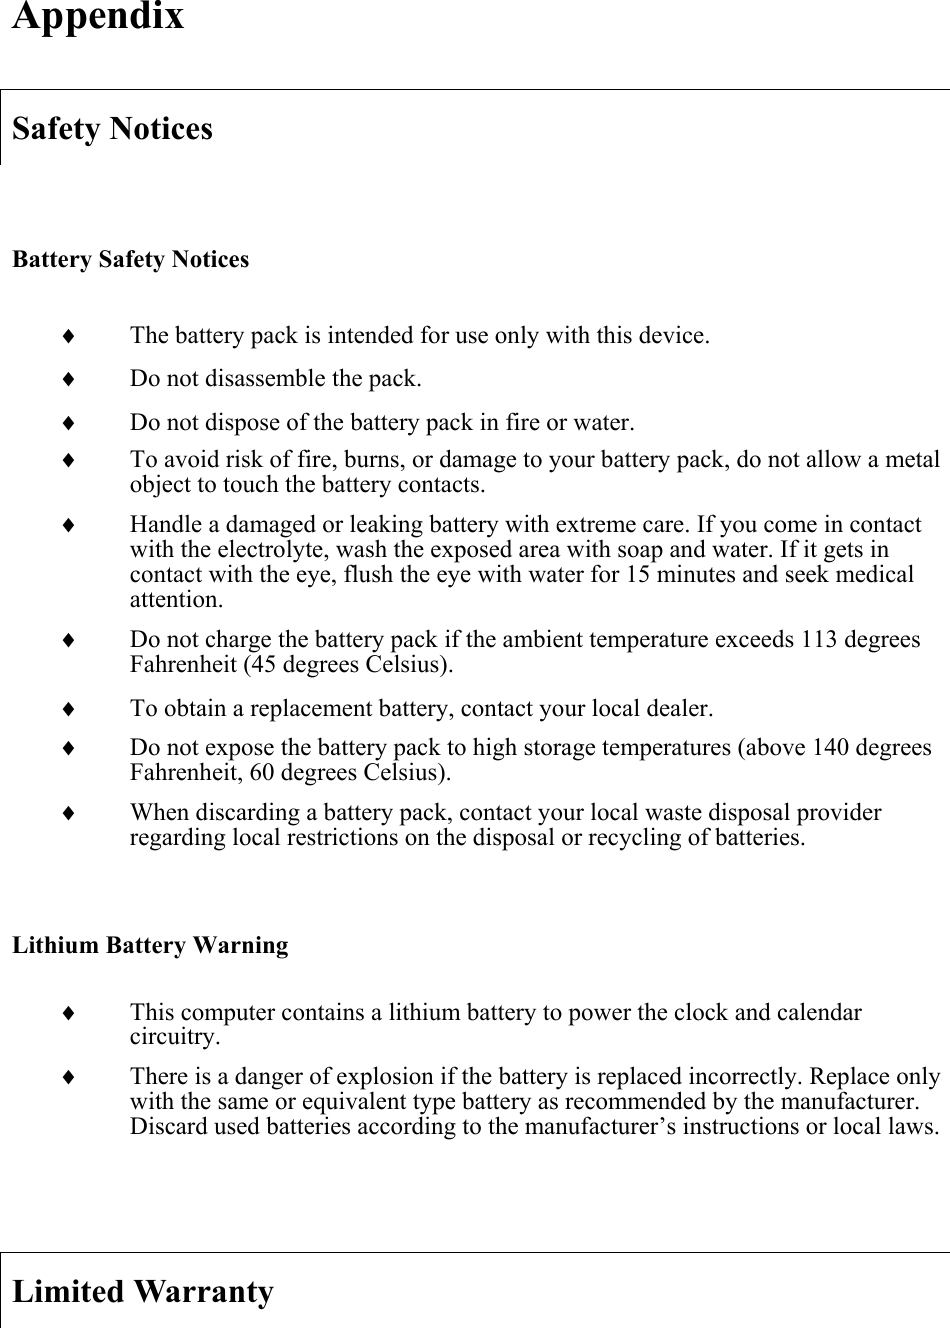 AppendixSafety Notices Battery Safety Noticesi The battery pack is intended for use only with this device. i Do not disassemble the pack. i Do not dispose of the battery pack in fire or water. i To avoid risk of fire, burns, or damage to your battery pack, do not allow a metal object to touch the battery contacts. i Handle a damaged or leaking battery with extreme care. If you come in contact with the electrolyte, wash the exposed area with soap and water. If it gets in contact with the eye, flush the eye with water for 15 minutes and seek medical attention.i Do not charge the battery pack if the ambient temperature exceeds 113 degrees Fahrenheit (45 degrees Celsius). i To obtain a replacement battery, contact your local dealer. i Do not expose the battery pack to high storage temperatures (above 140 degrees Fahrenheit, 60 degrees Celsius). i When discarding a battery pack, contact your local waste disposal provider regarding local restrictions on the disposal or recycling of batteries. Lithium Battery Warning i This computer contains a lithium battery to power the clock and calendar circuitry.i There is a danger of explosion if the battery is replaced incorrectly. Replace only with the same or equivalent type battery as recommended by the manufacturer. Discard used batteries according to the manufacturer’s instructions or local laws. Limited Warranty 